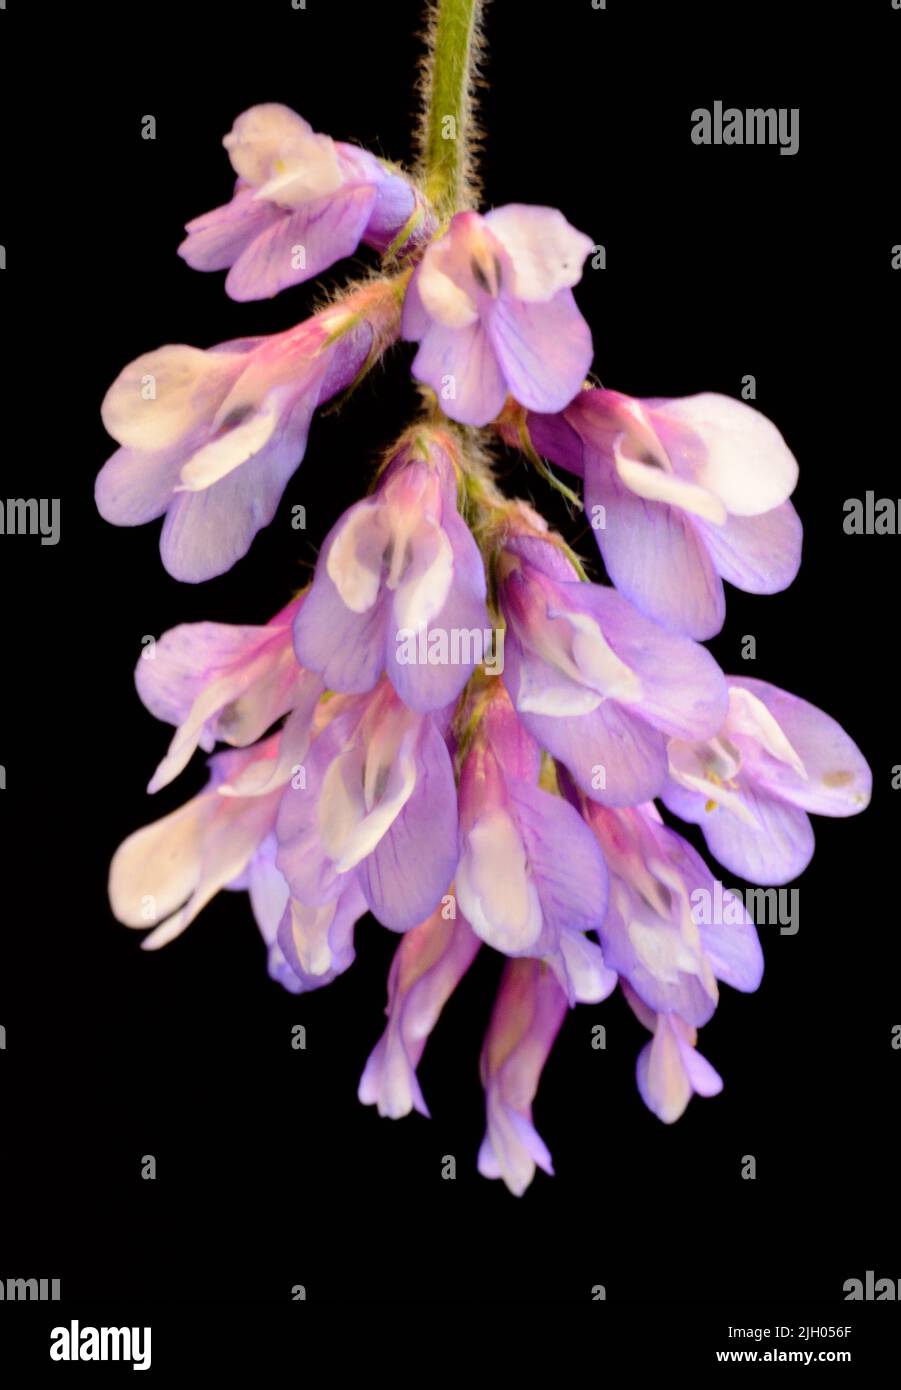 Closeup of Hairy Vetch (Vicia villosa) purple flowers against a black background Stock Photo